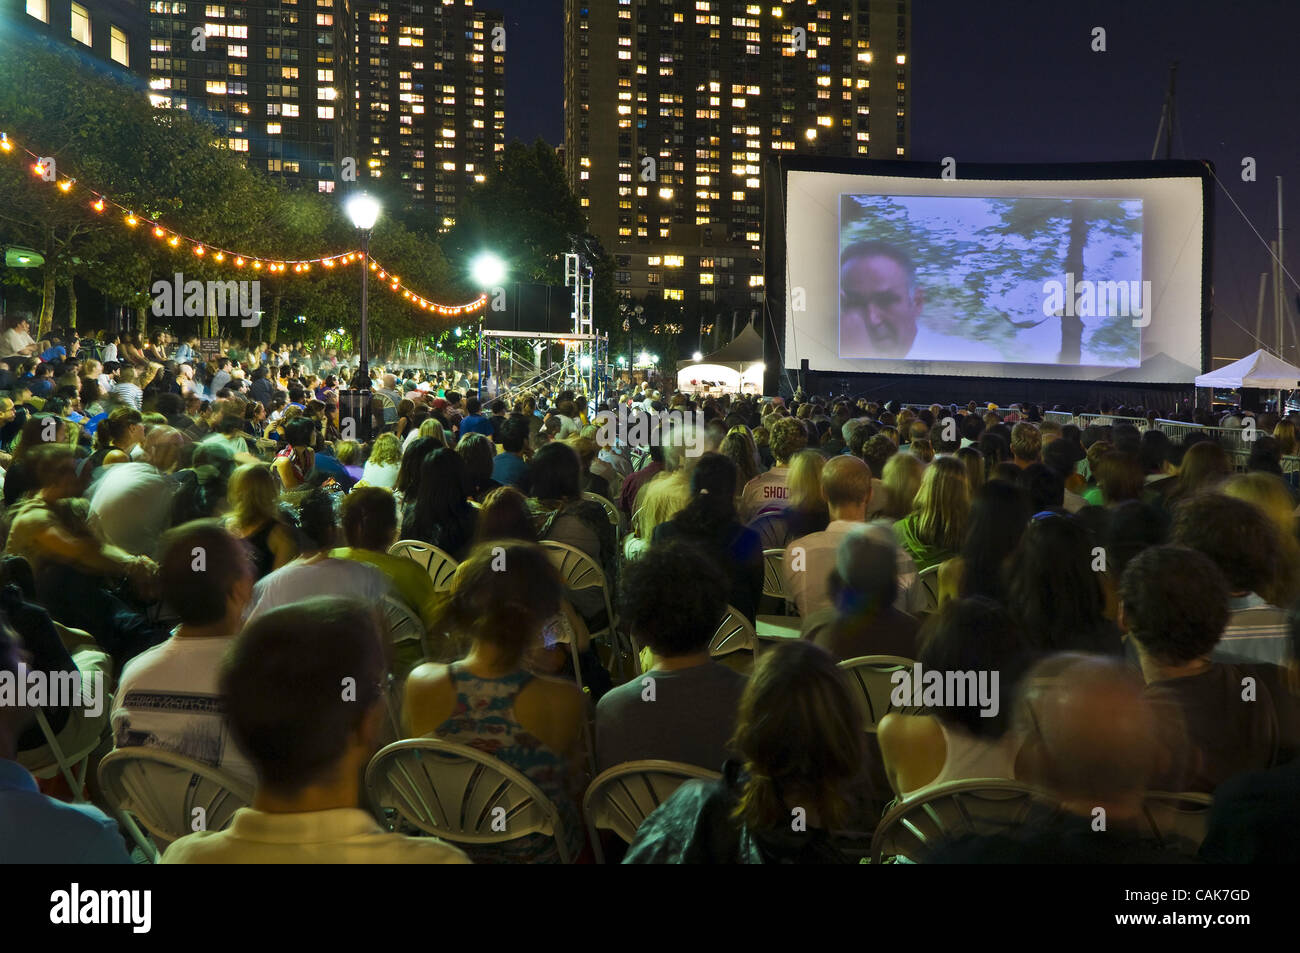 World Financial Center New York City Battery Park Tropfest short film  festival movies by independent filmmakers under the stars warm autumn  evening lower Manhattan audience viewing various 7 minute films projected  onto